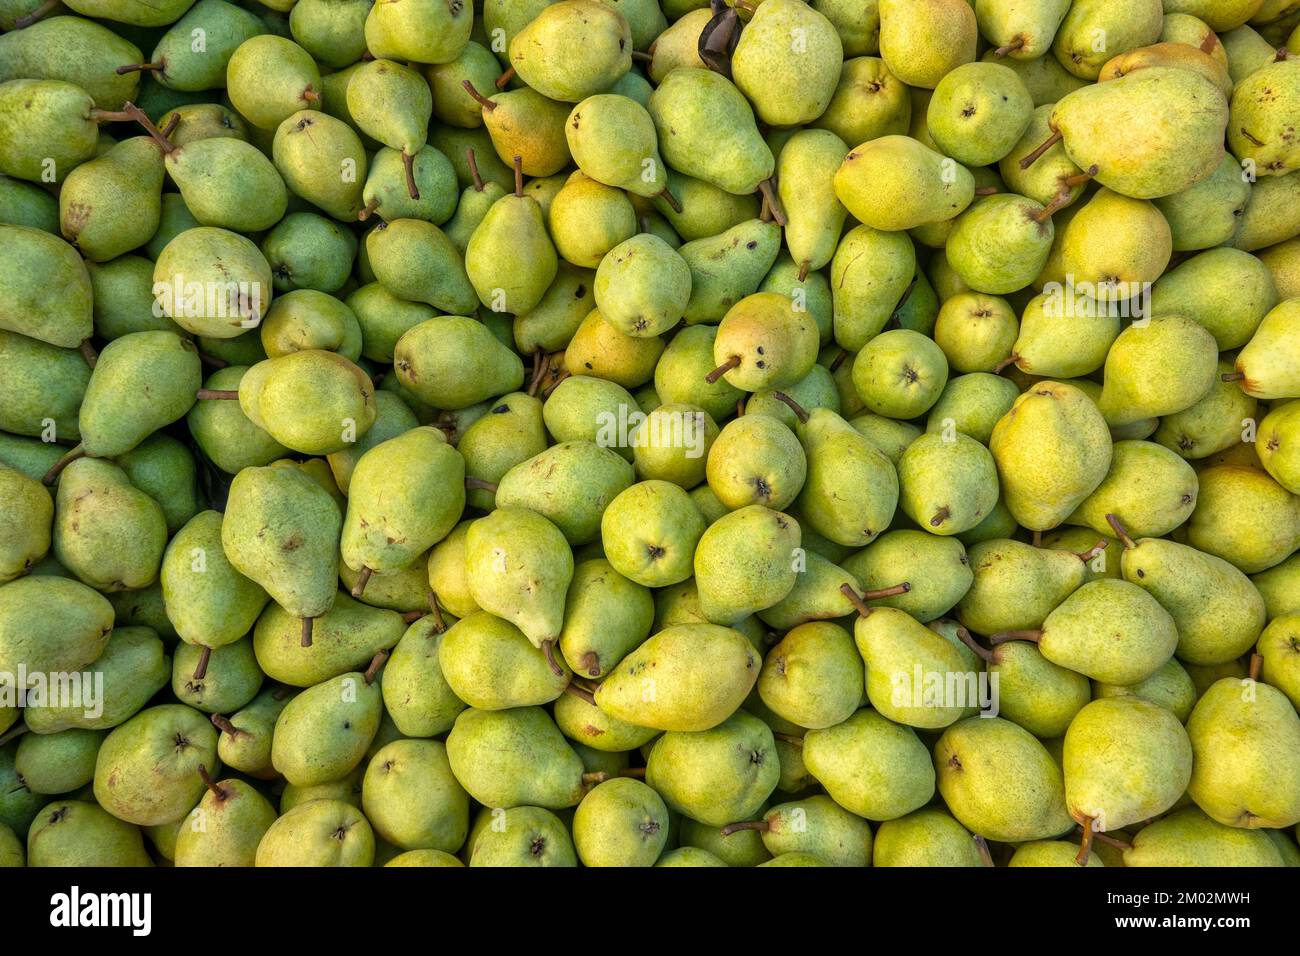 Close-up shop of some European pears Stock Photo